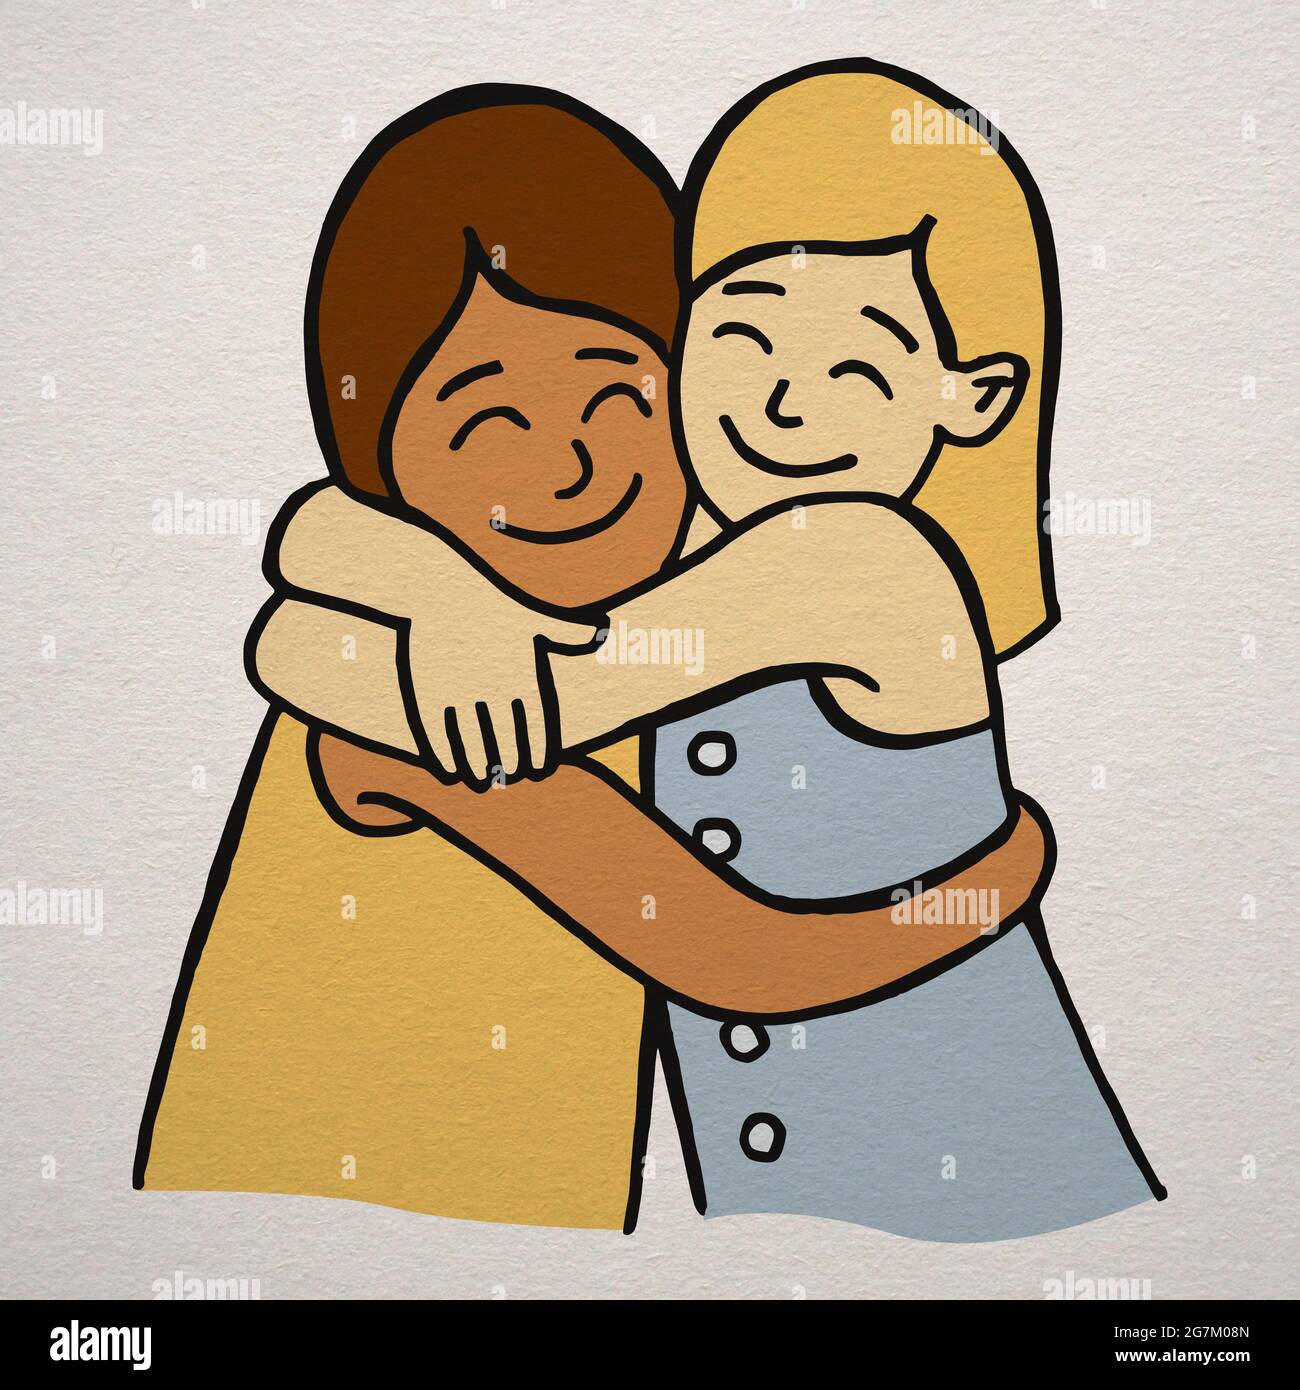 Cartoon style illustration of two young girls friends hugging and smiling -  Interracial best friends forever kids Stock Photo - Alamy